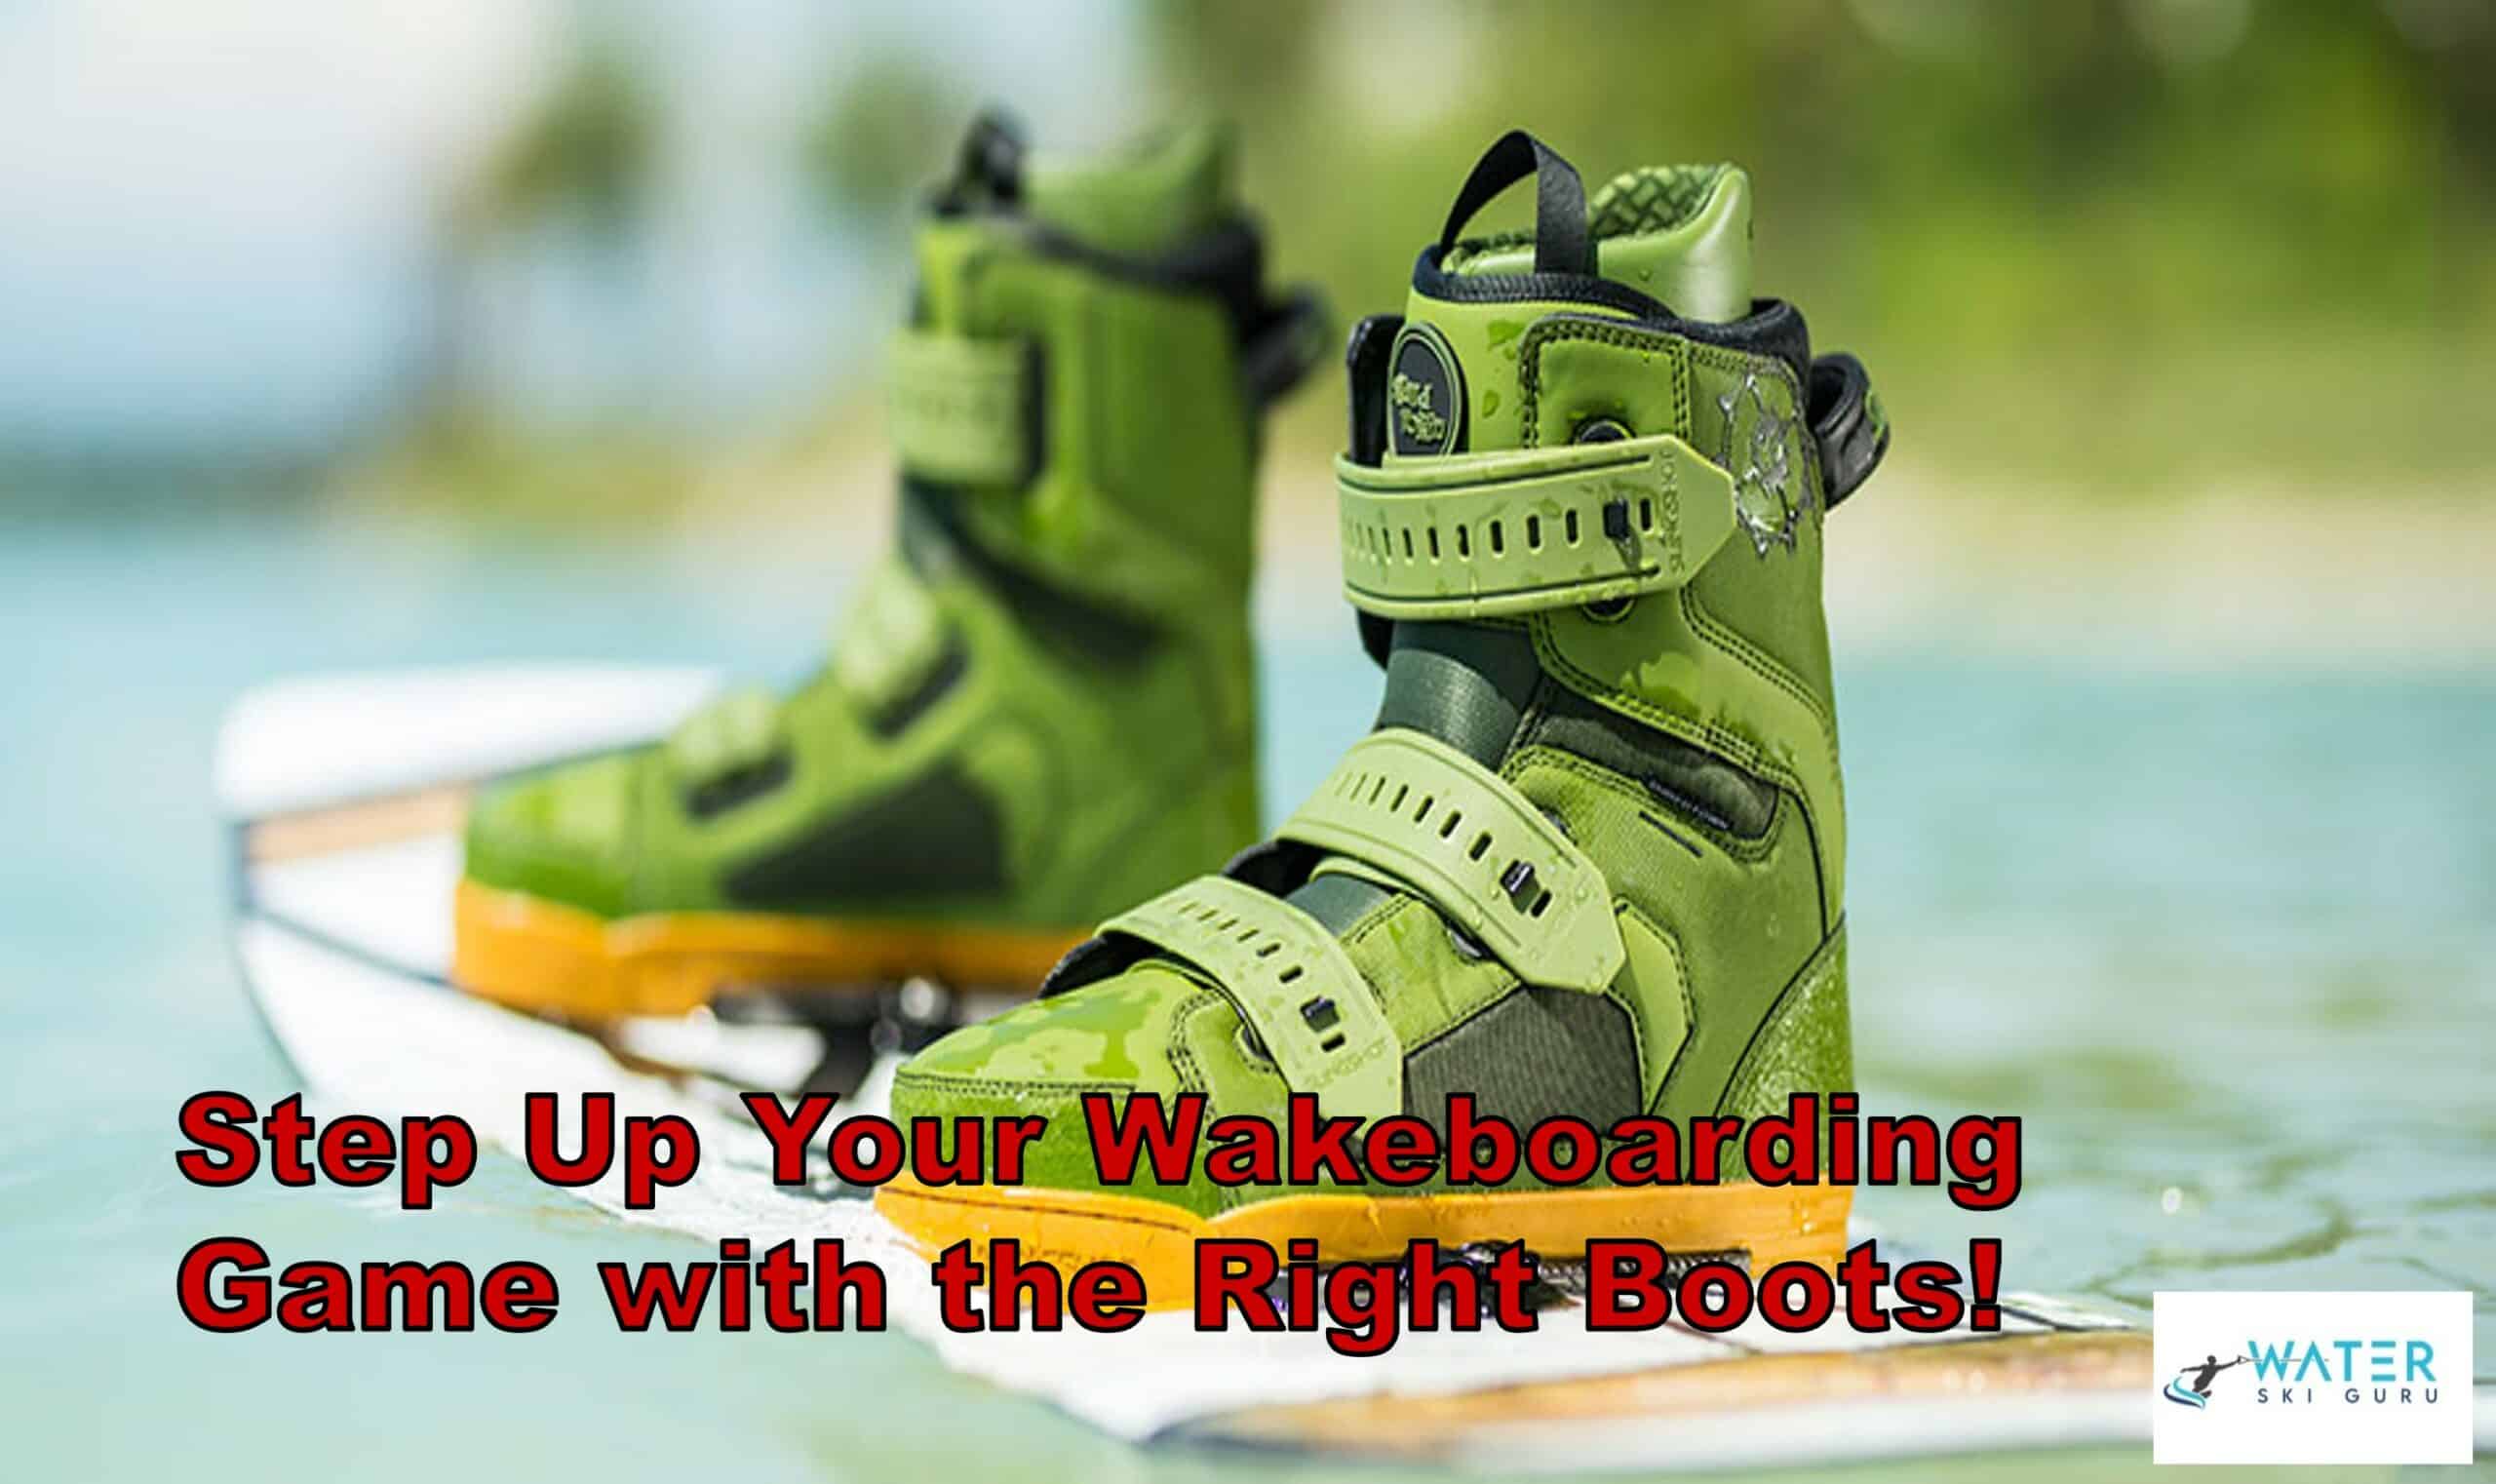 Step Up Your Wakeboarding Game with the Right Boots!